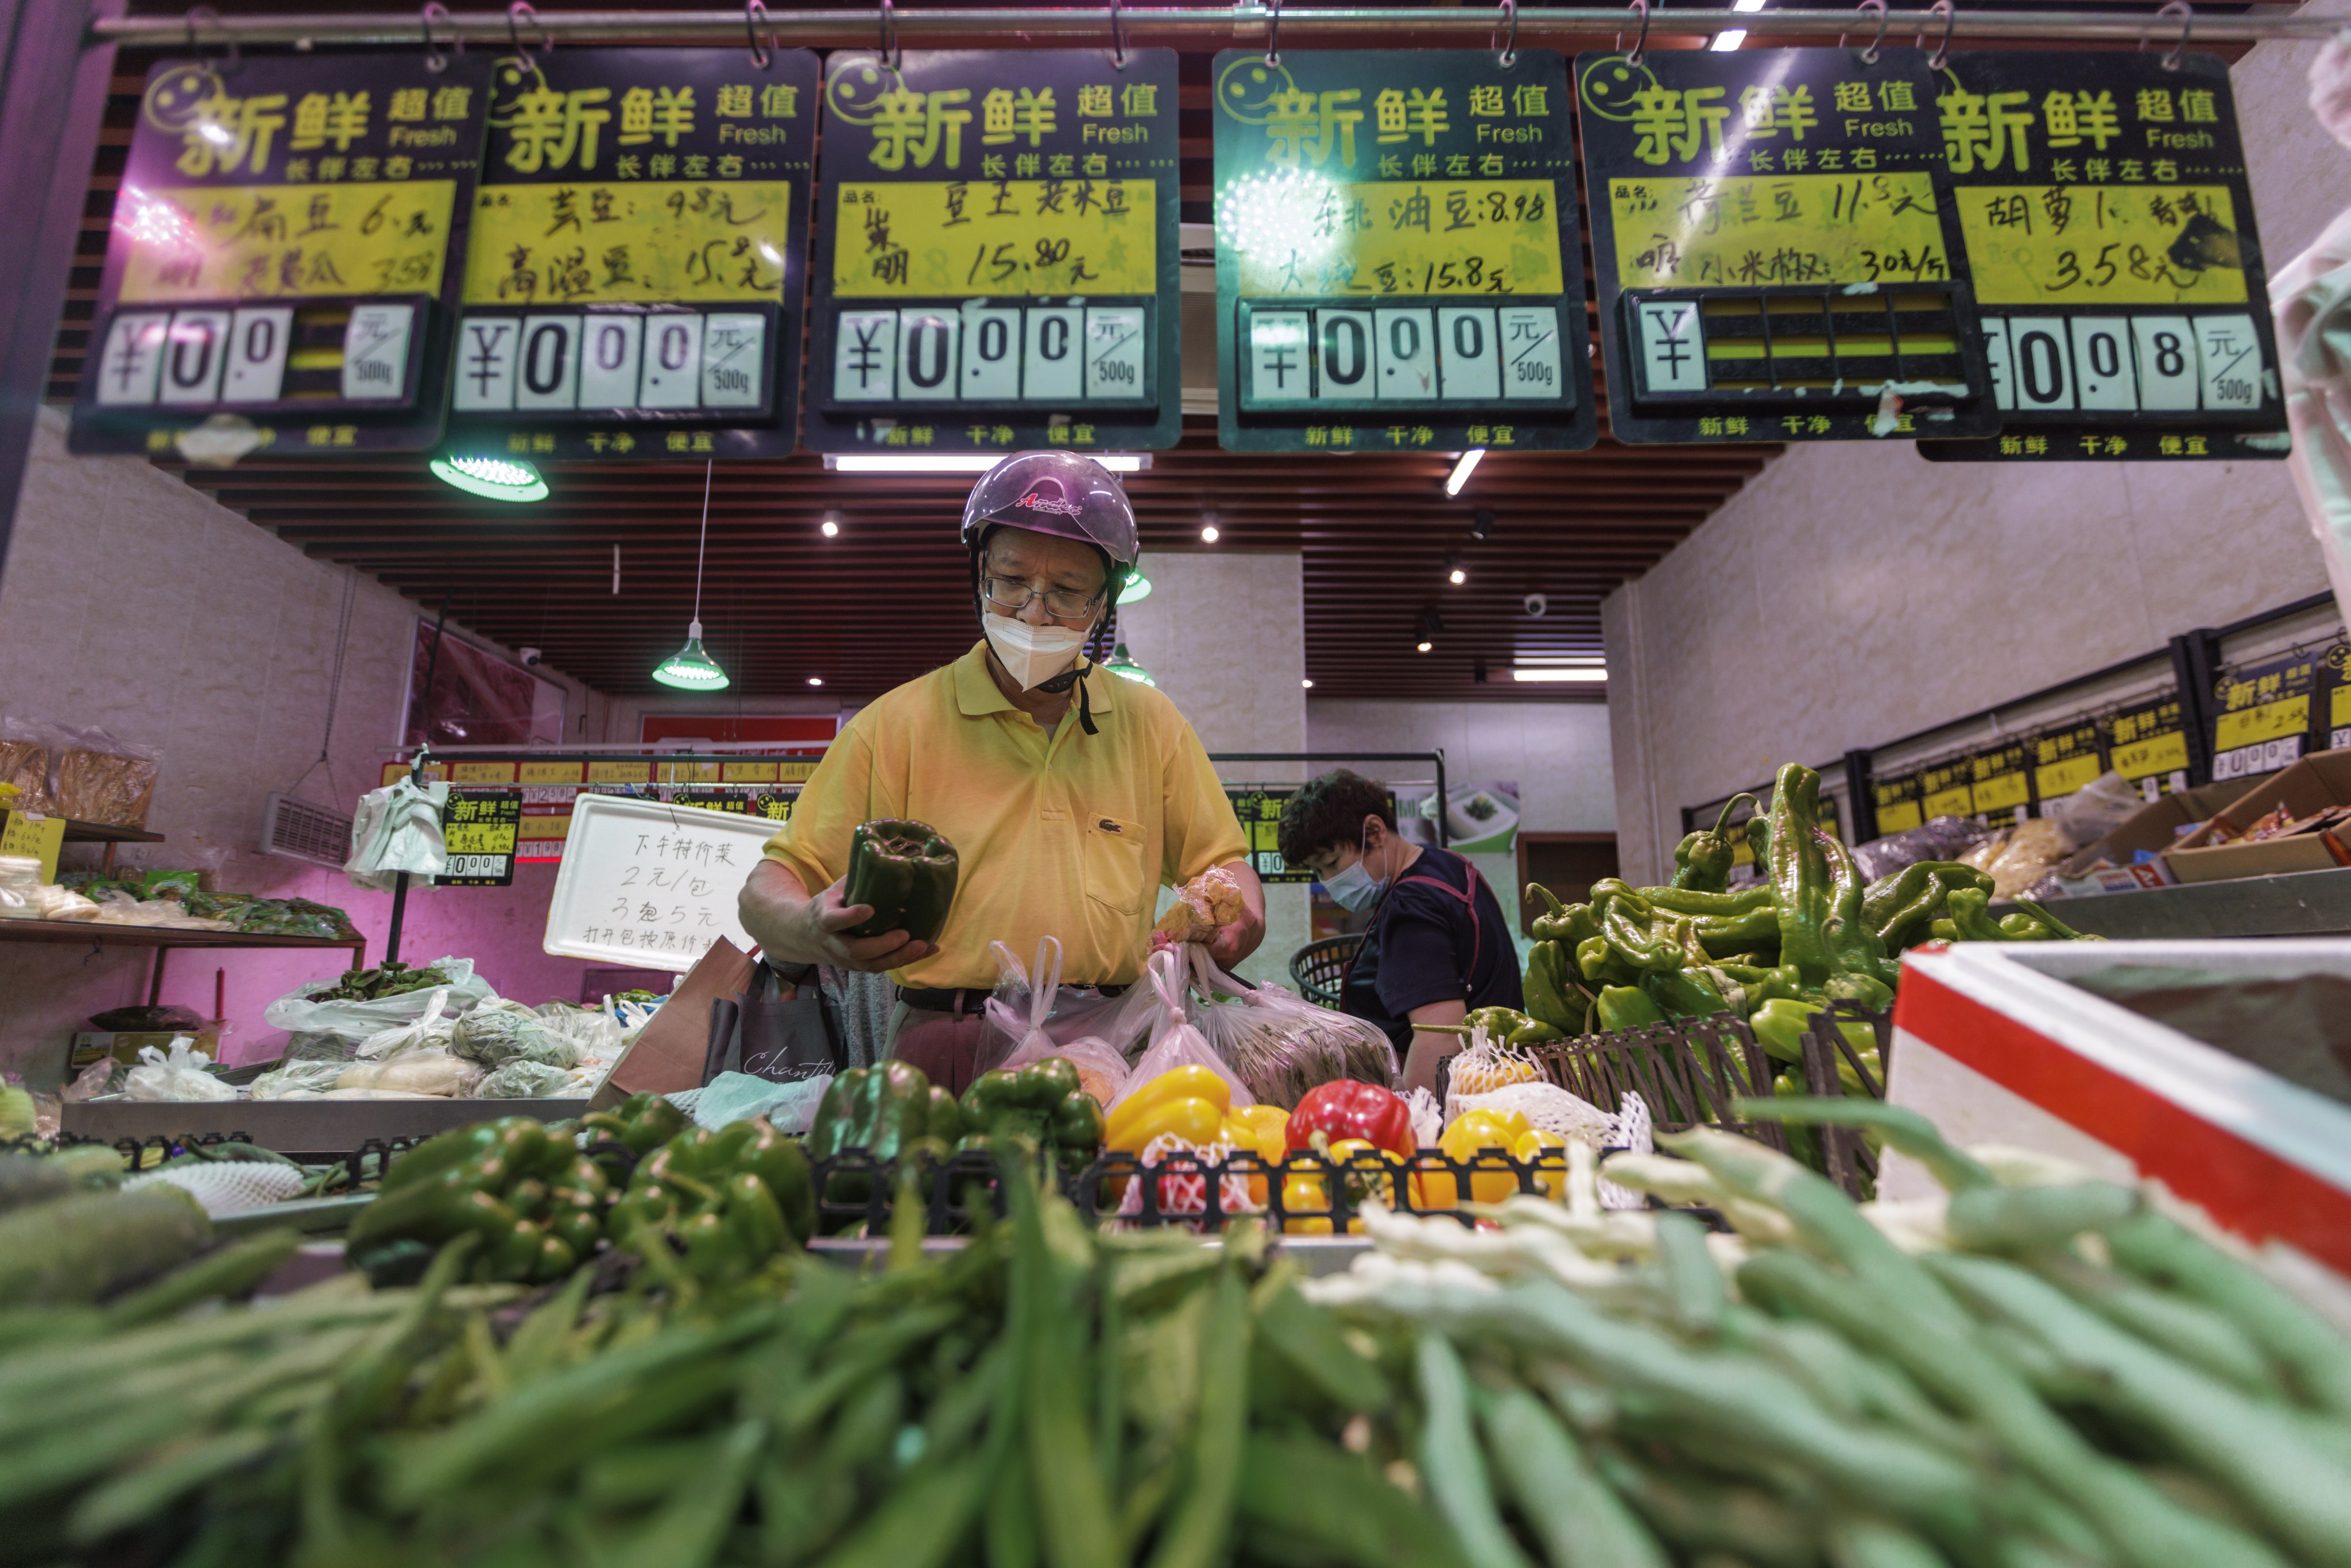 China’s consumer price index (CPI) rose by 2.5 per cent in June from a year earlier, up from a rise of 2.1 per cent in May. Photo: EPA-EFE